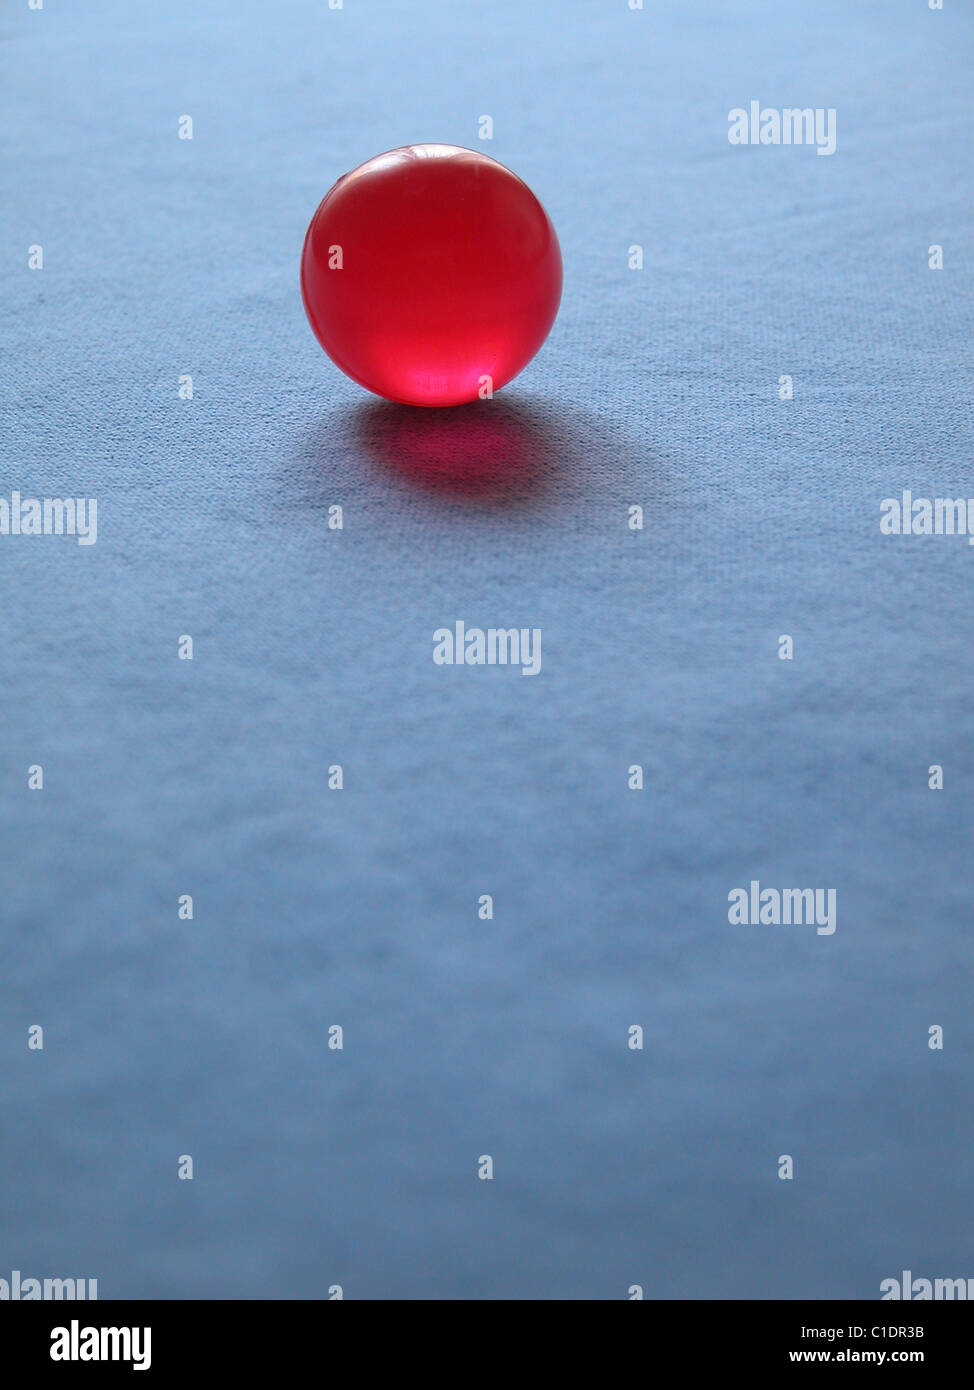 Red Ball Stock Photo